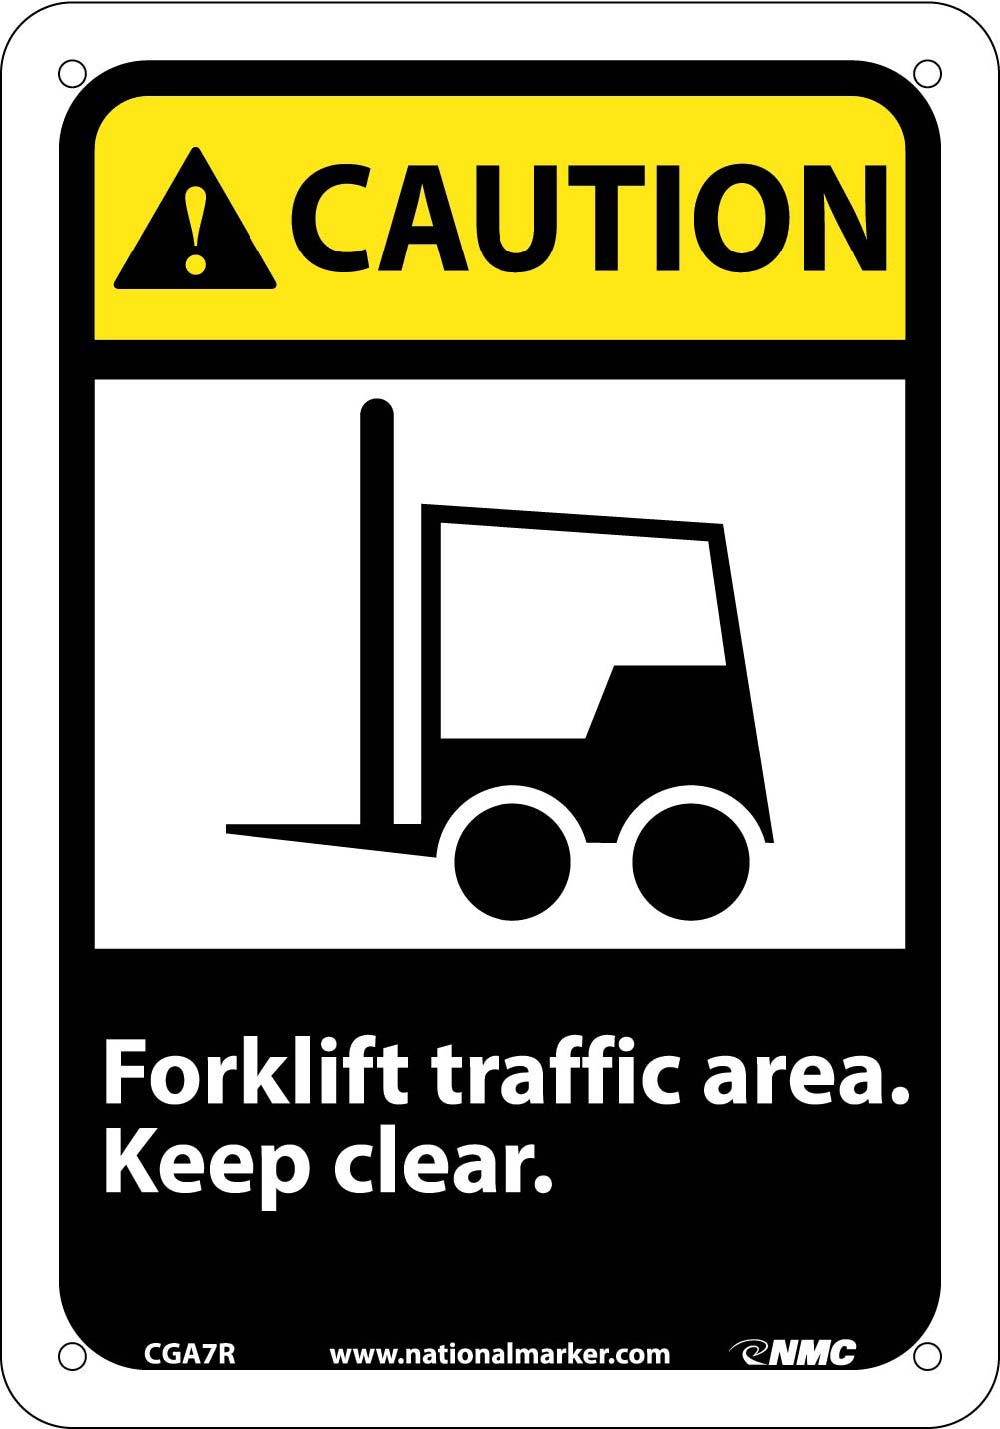 Caution Forklift Traffic Area Keep Clear Sign-eSafety Supplies, Inc